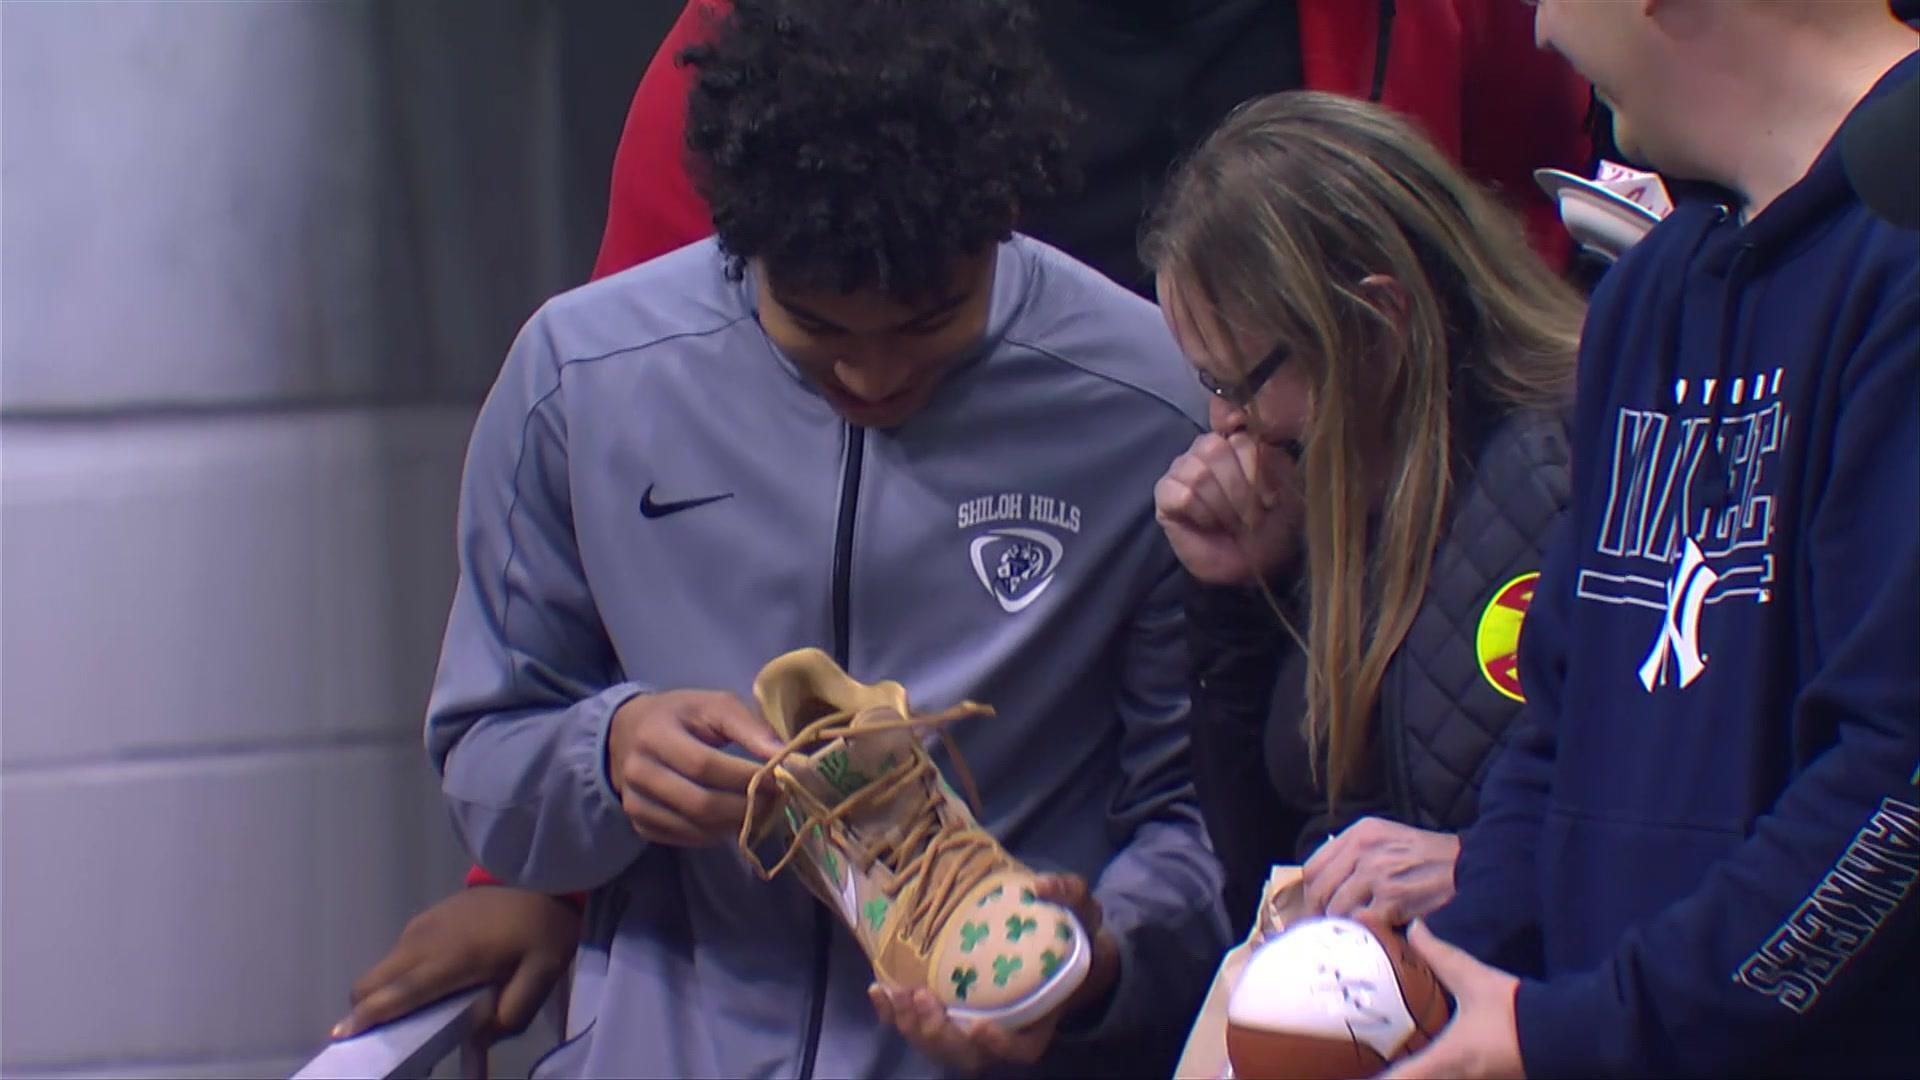 Another happy fan goes home with Kyrie Irving's shoes. NBC